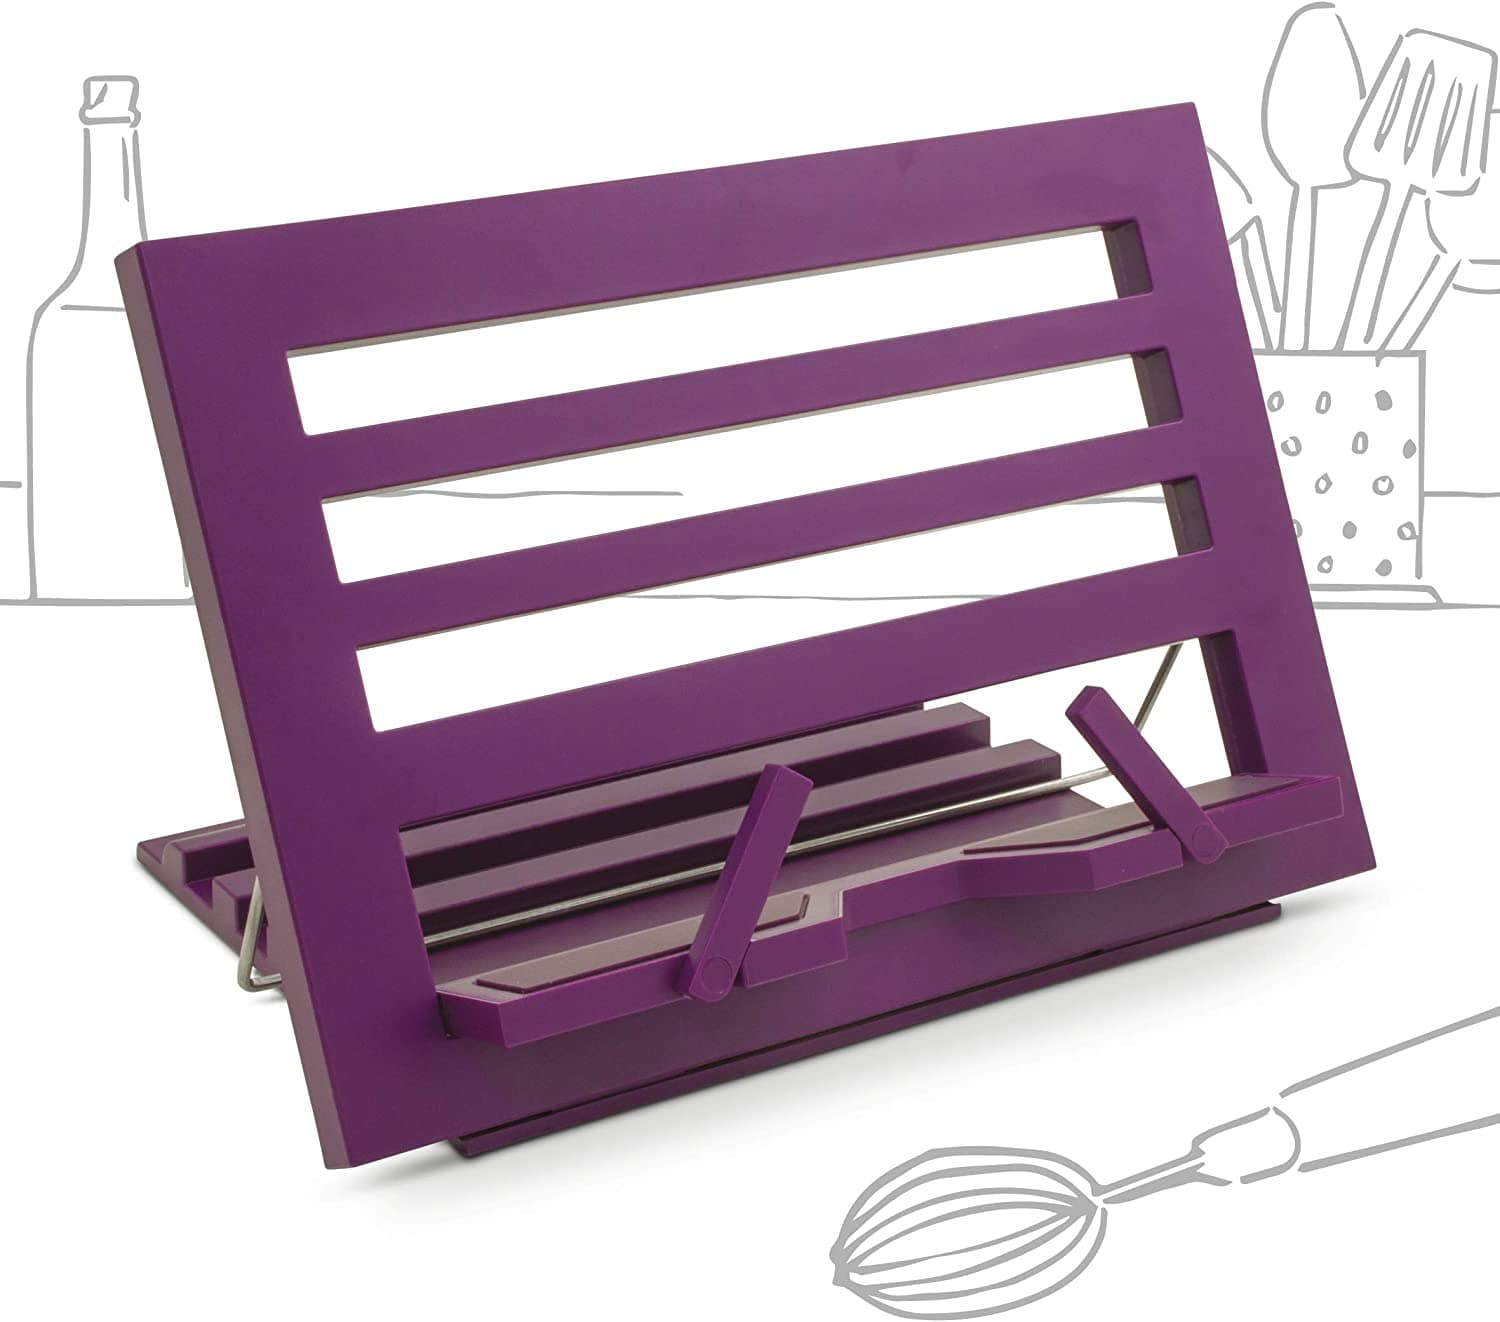 THE NEW BRILLIANT READING REST - MULBERRY PURPLE